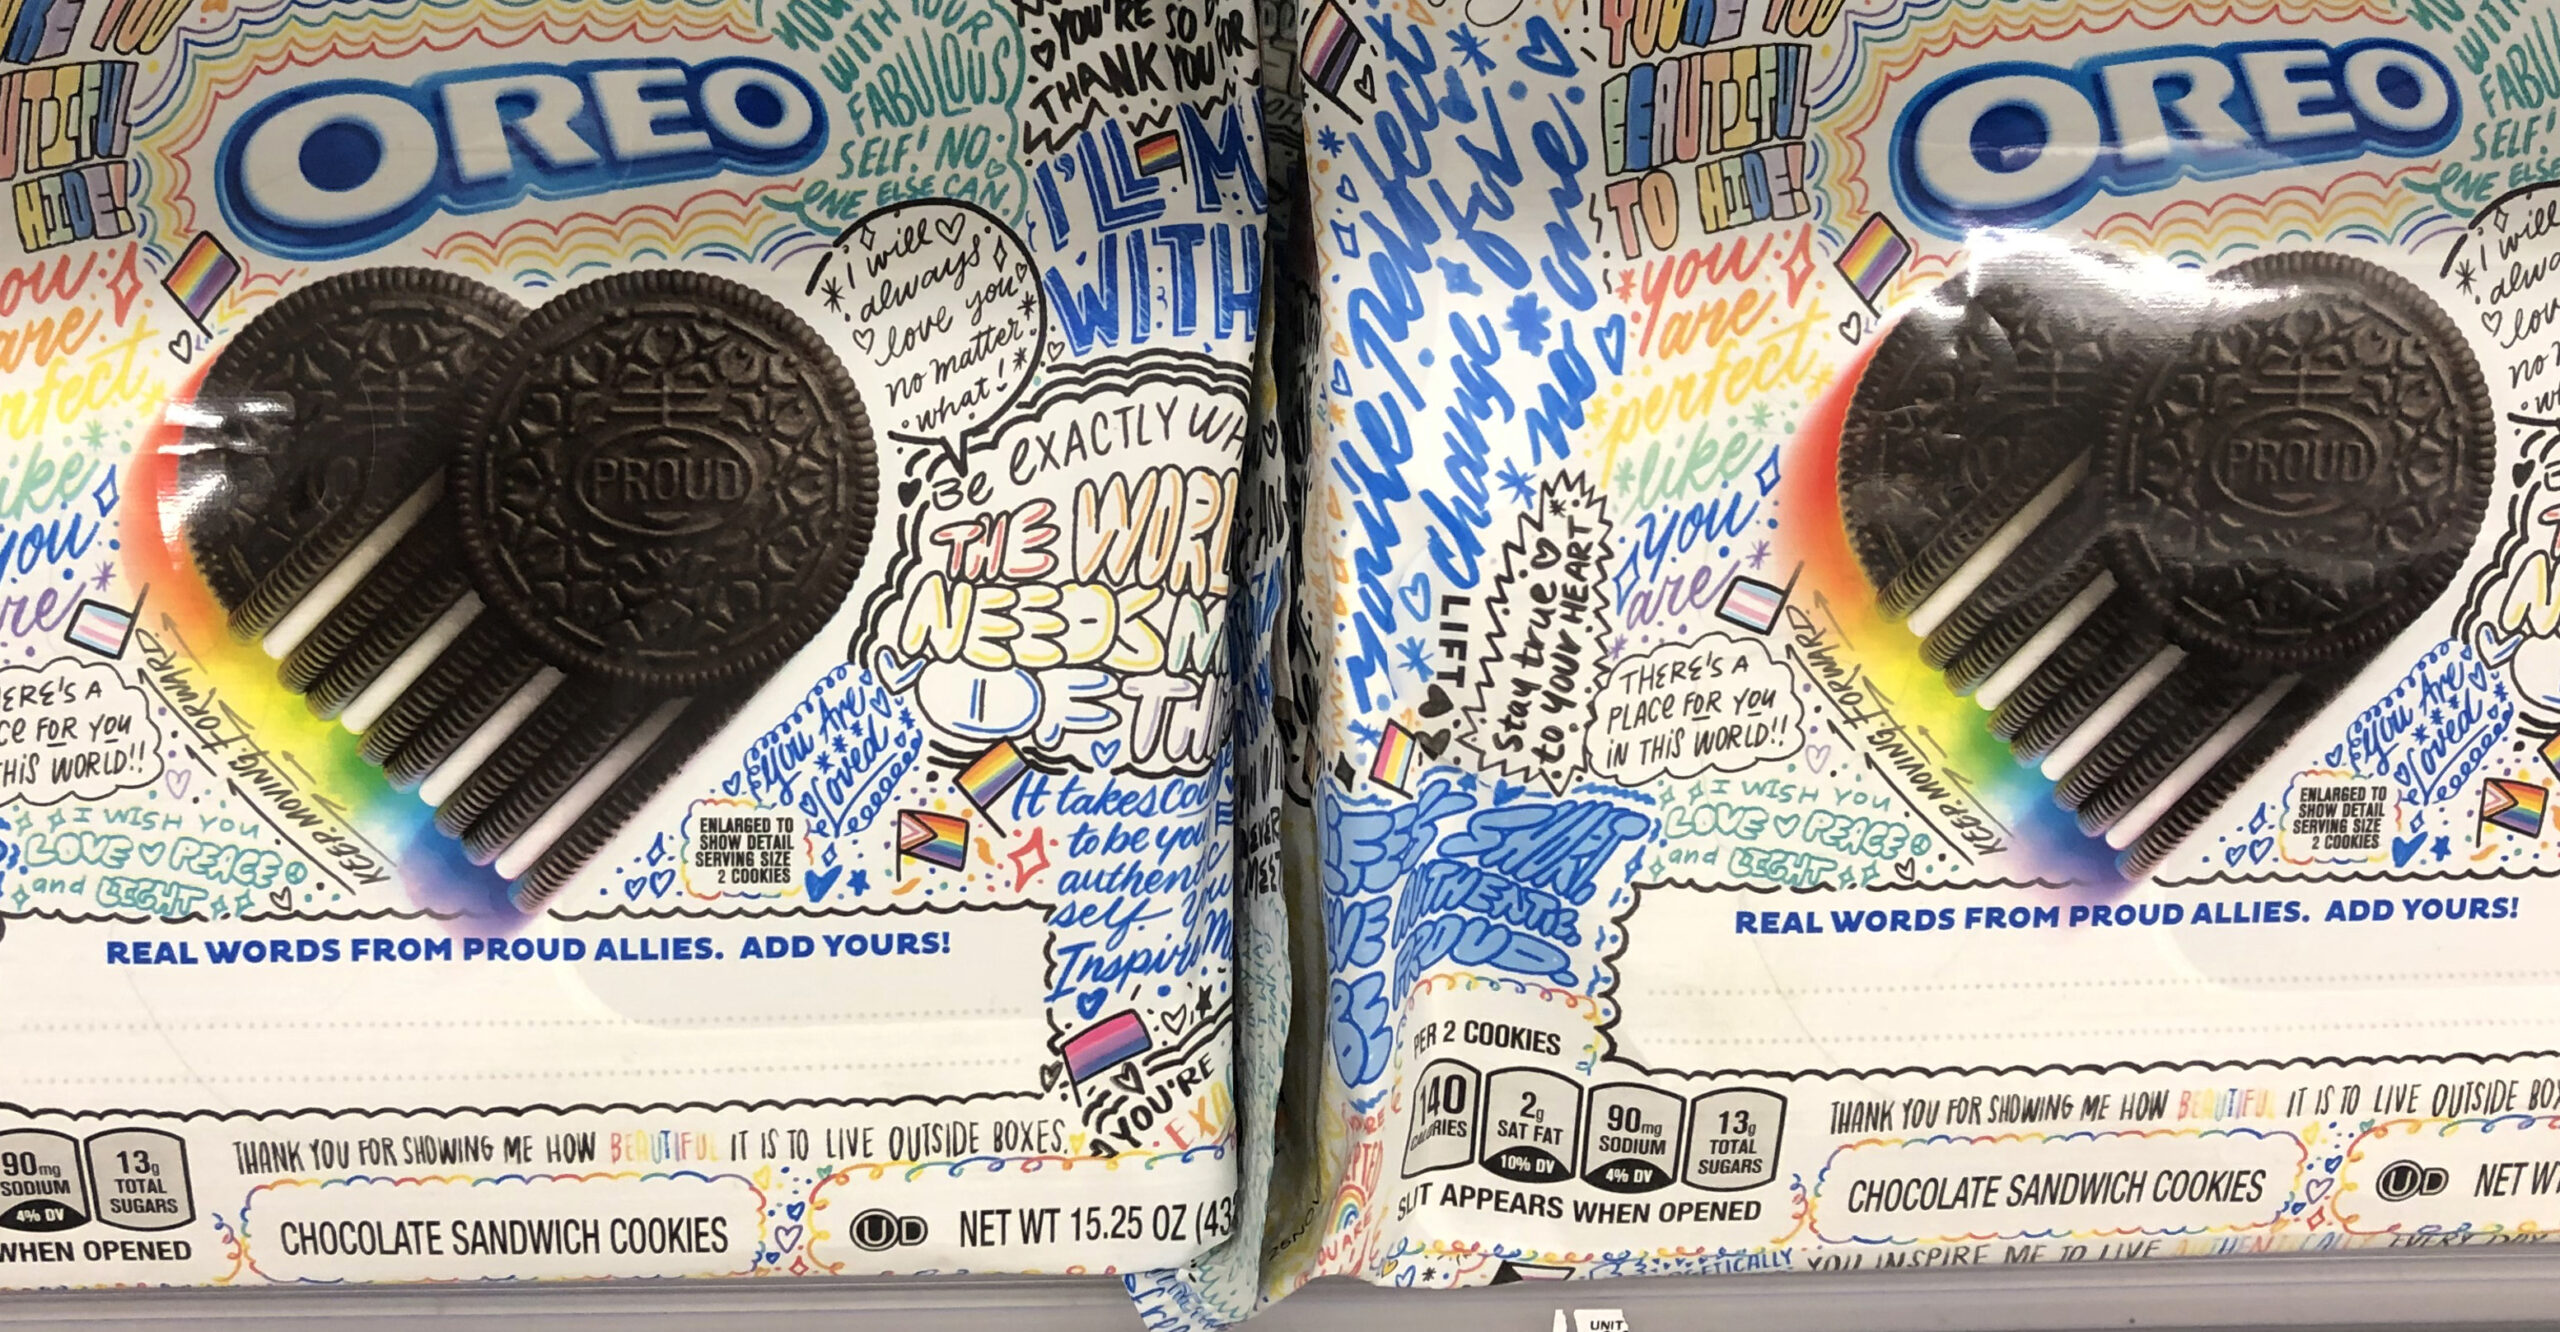 EXCLUSIVE: Campaign Highlights Oreo's Partnership With 'Militant' LGBTQ Group